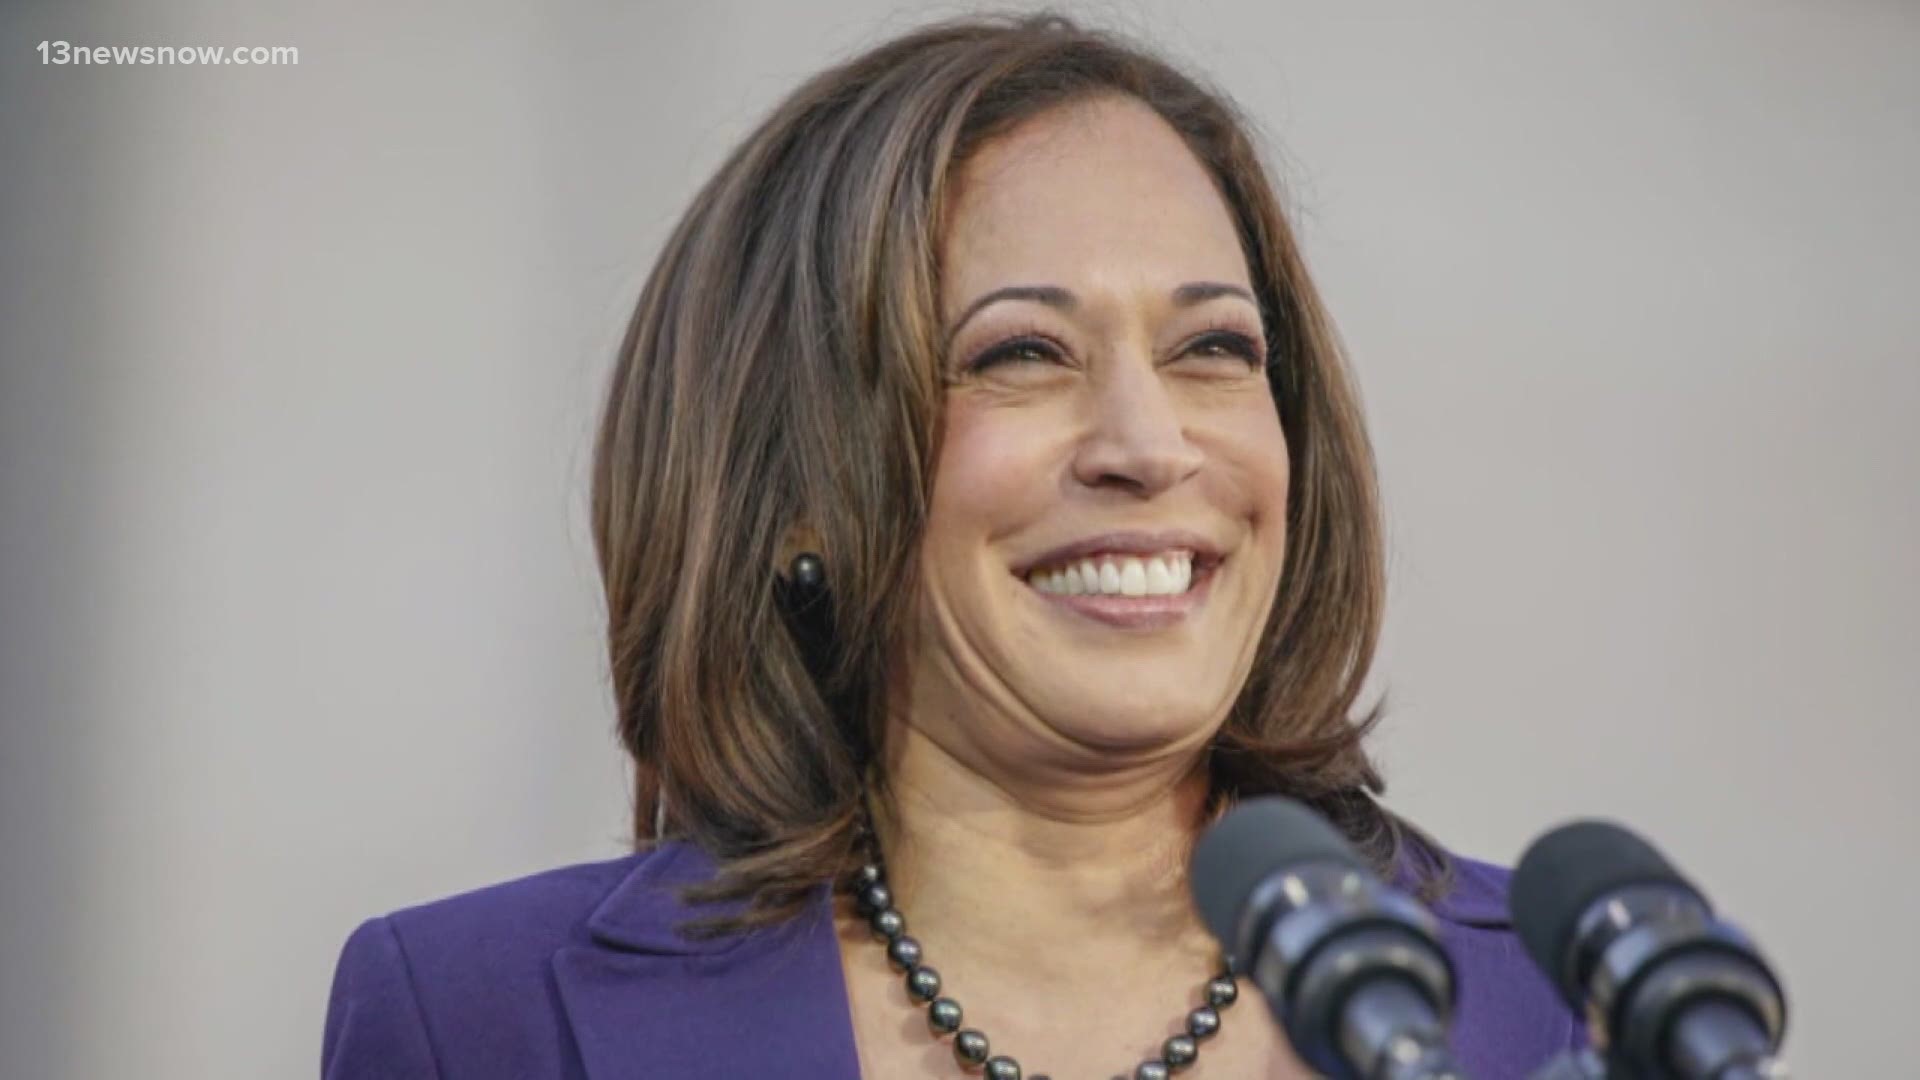 Harris is the first Black and Indian-American person to be selected as a Vice Presidential nominee for a major party. She could also be the first female VP.